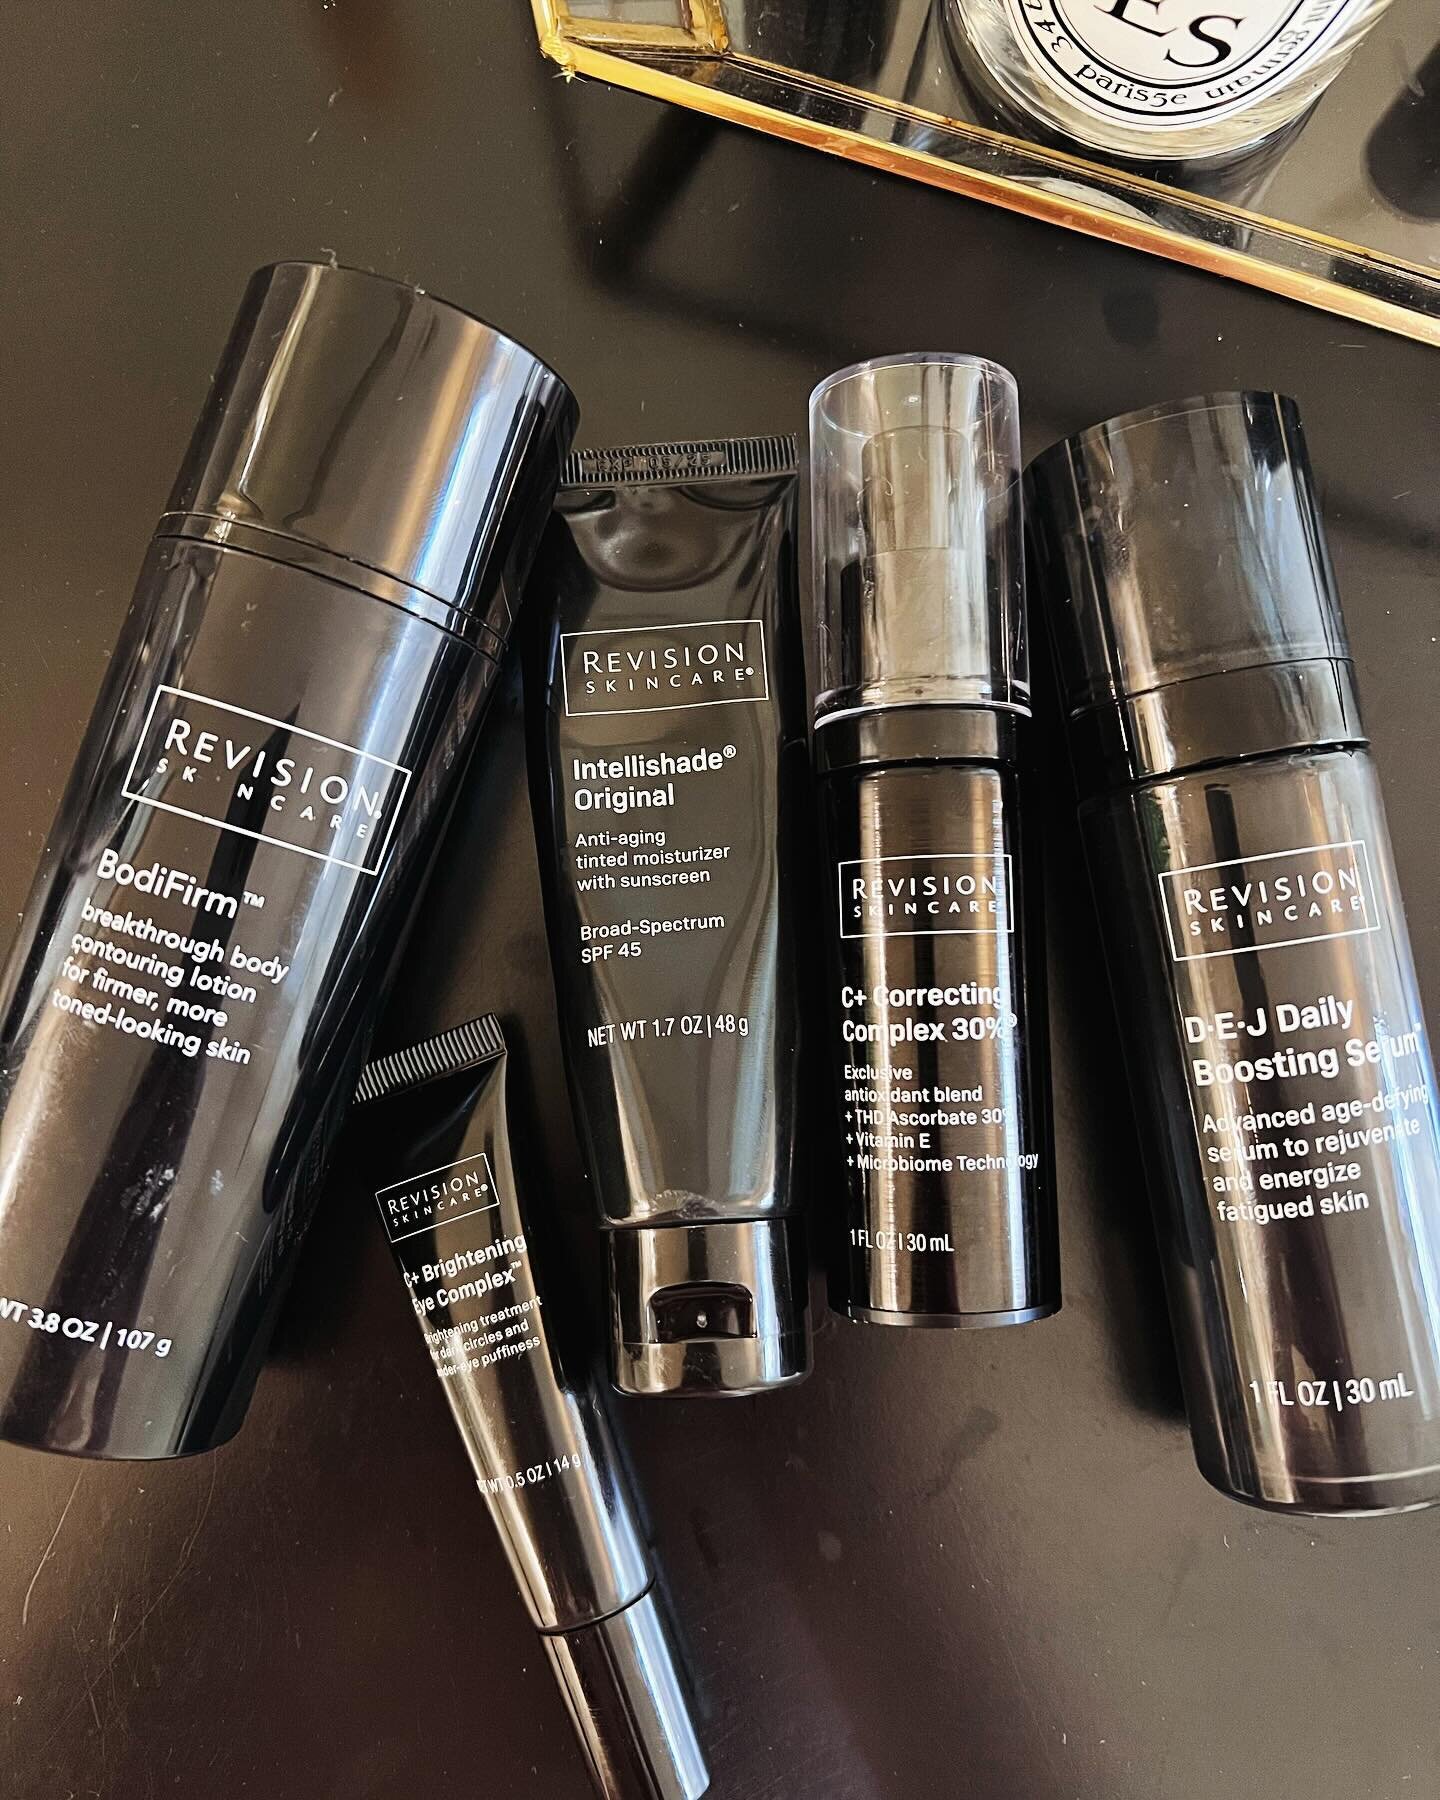 My morning routine. Anti-aging, targeting pigmentation, skin tightening, and also has anti-aging tinted moisturizer containing 100% all mineral sunscreen. Intellishade is my daily moisturizer and has enough coverage to replace my foundation